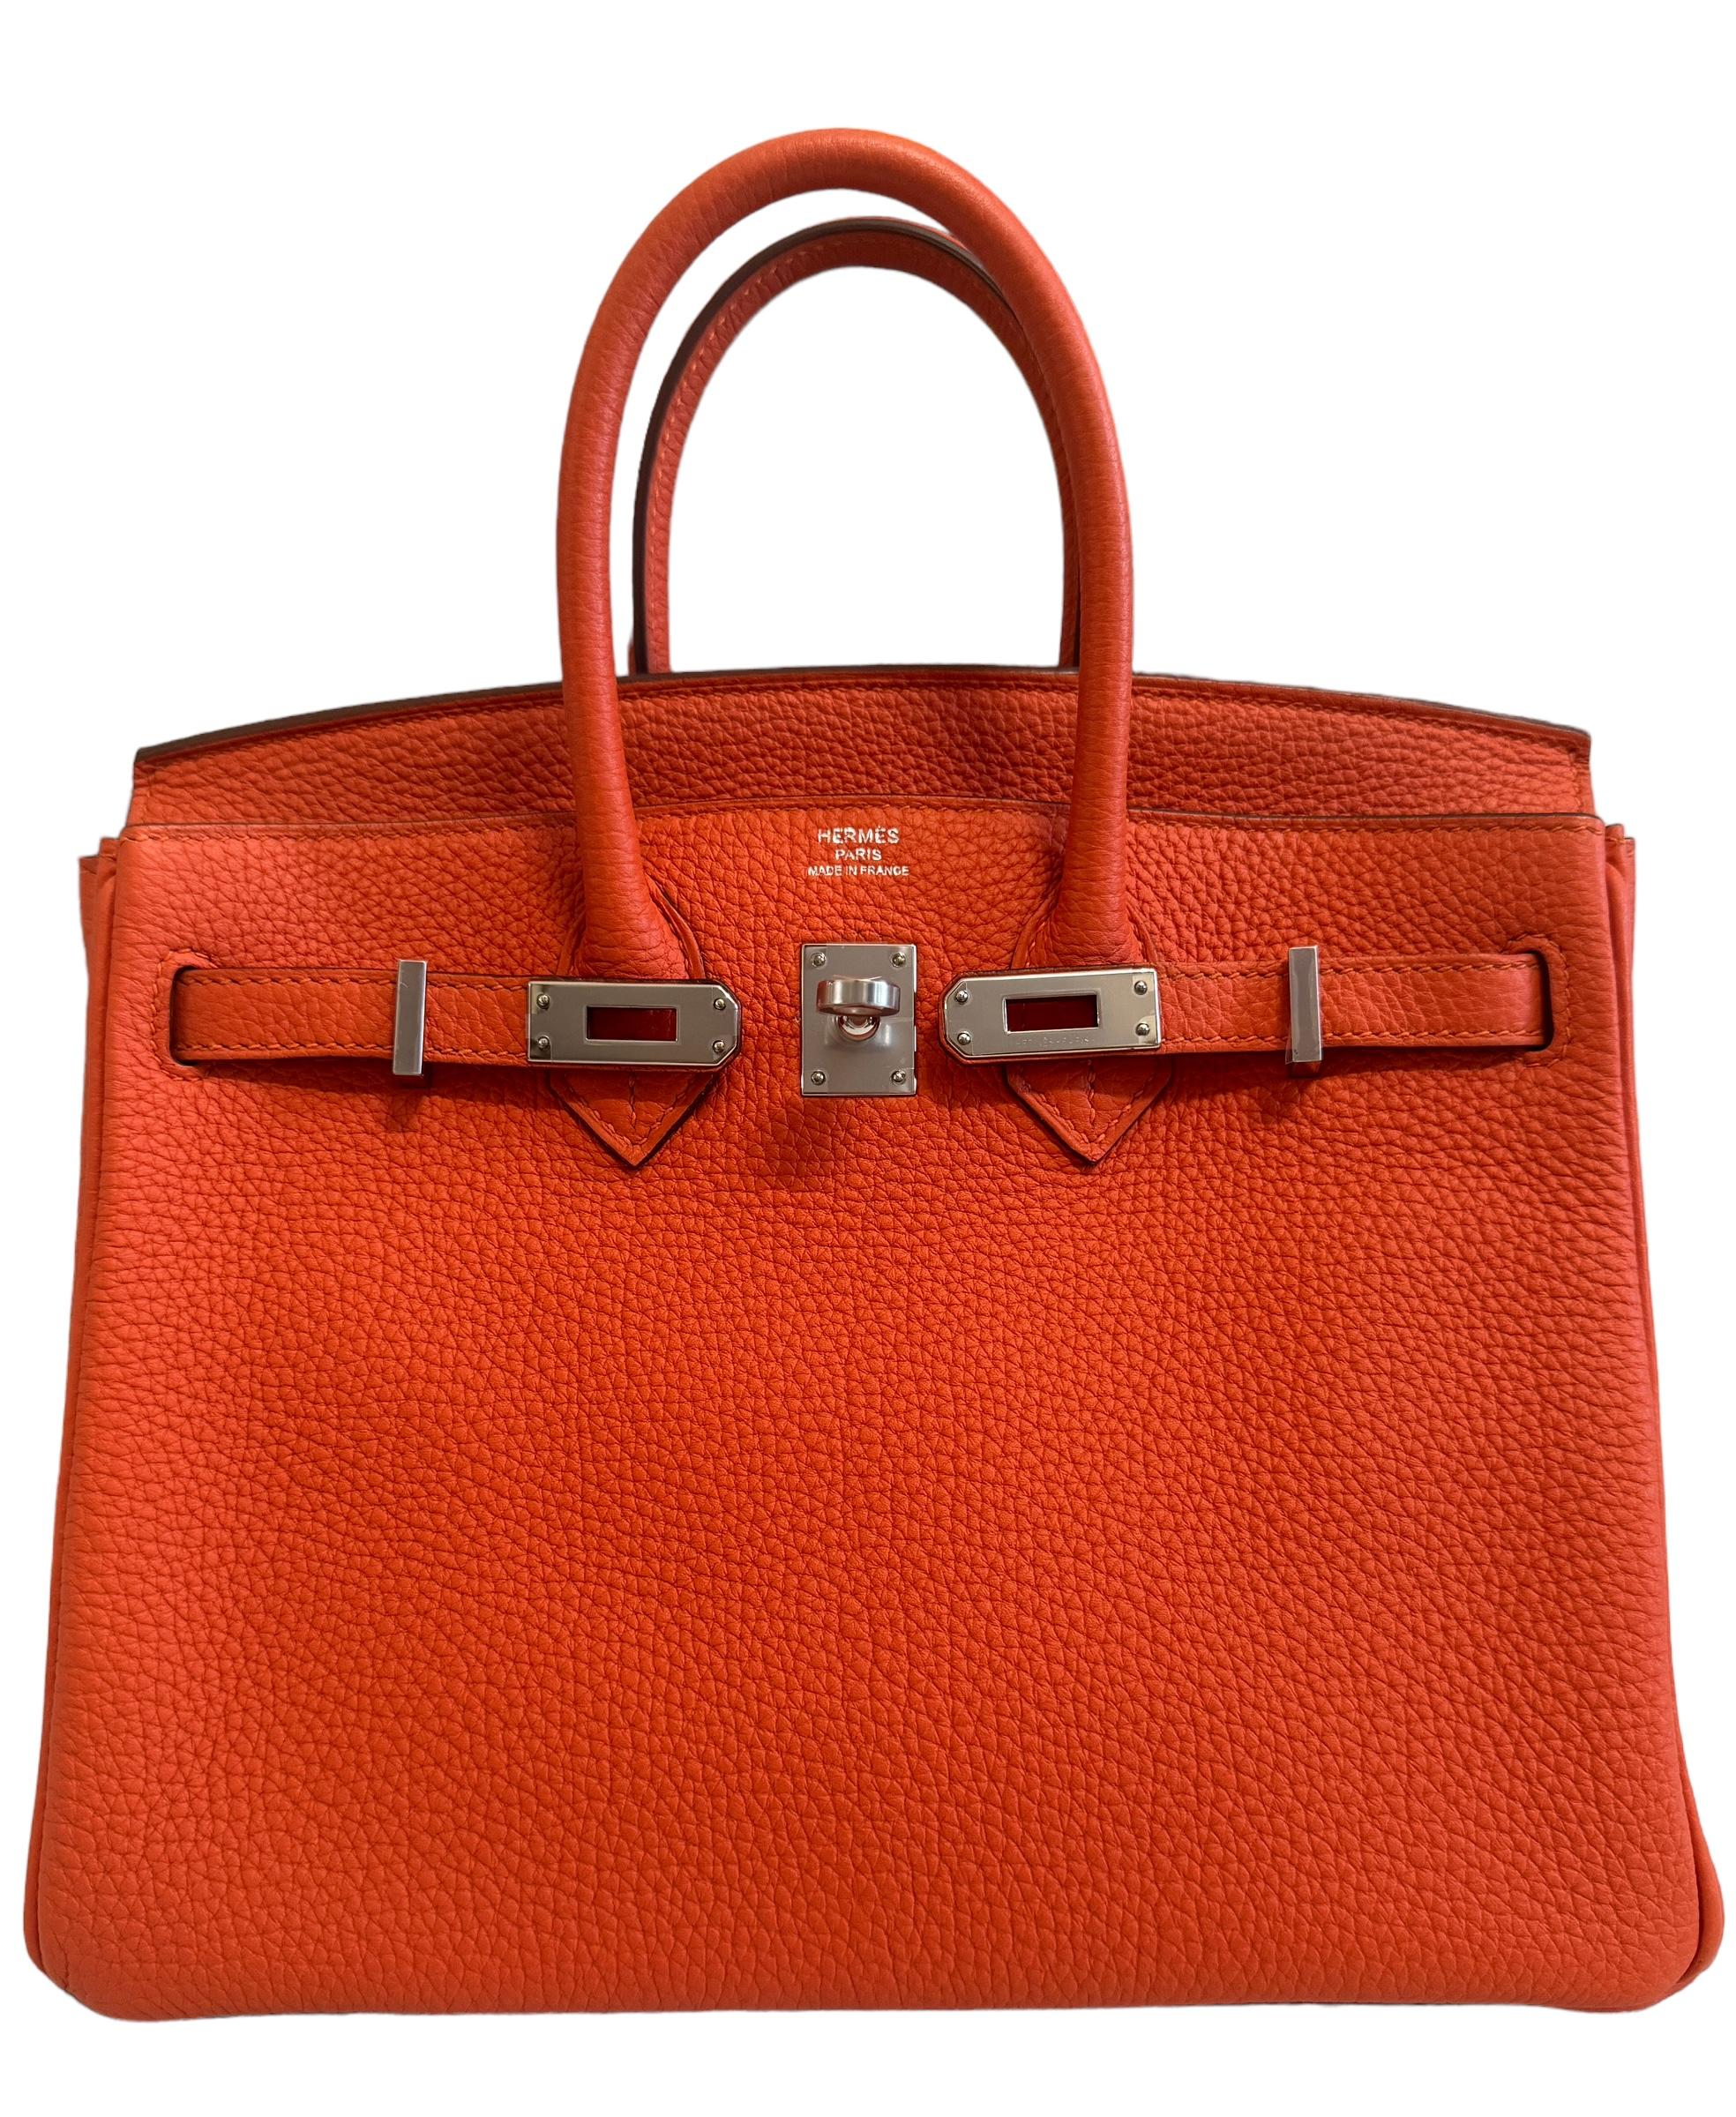 Stunning Hermes Birkin 25 Poppy Orange Togo Leather Complimented by Palladium Hardware. As New Pristine Condition with Plastic on Hardware, excellent corners and structure. 2019 D Stamp.

Please keep in mind that this is a pre owned item, the bag